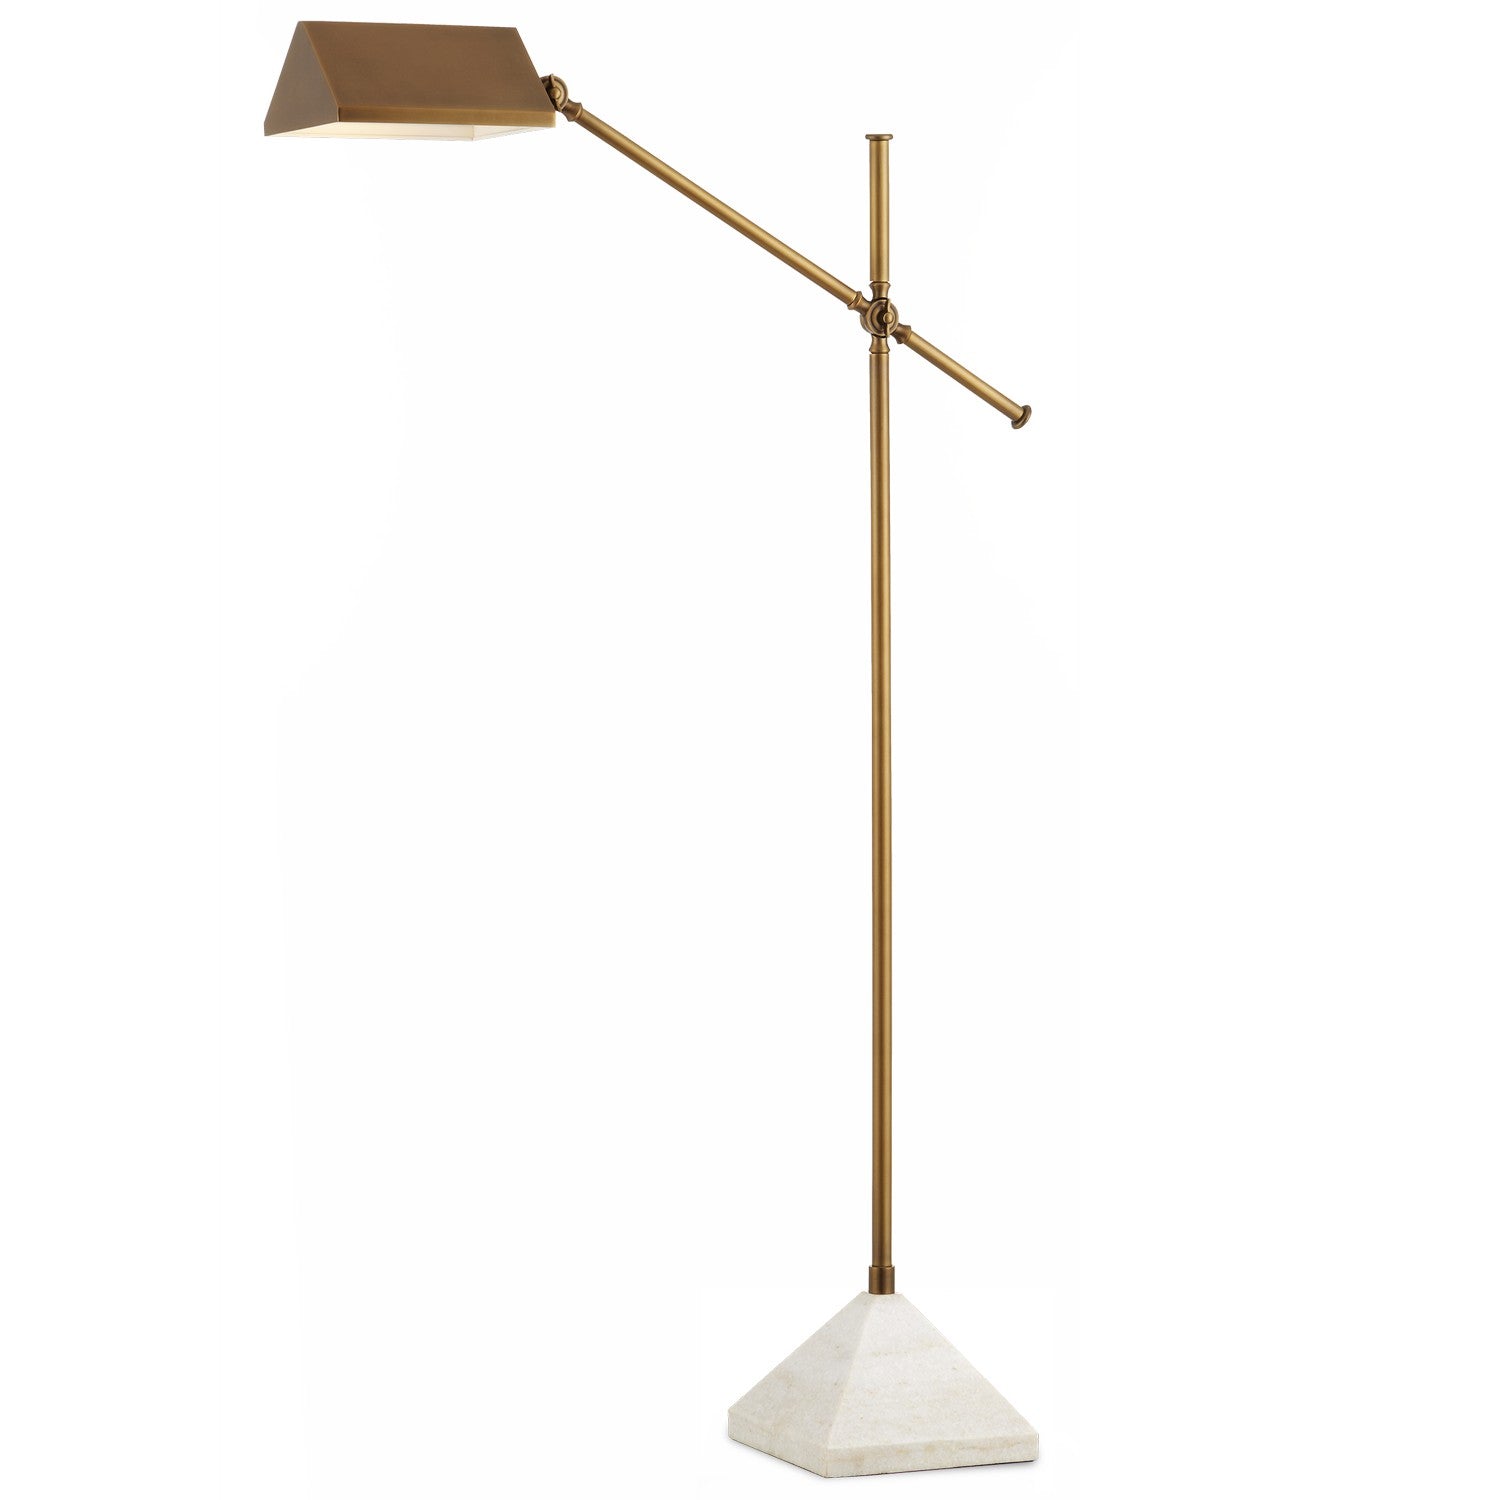 Currey and Company - 8000-0134 - One Light Floor Lamp - Antique Brass/White